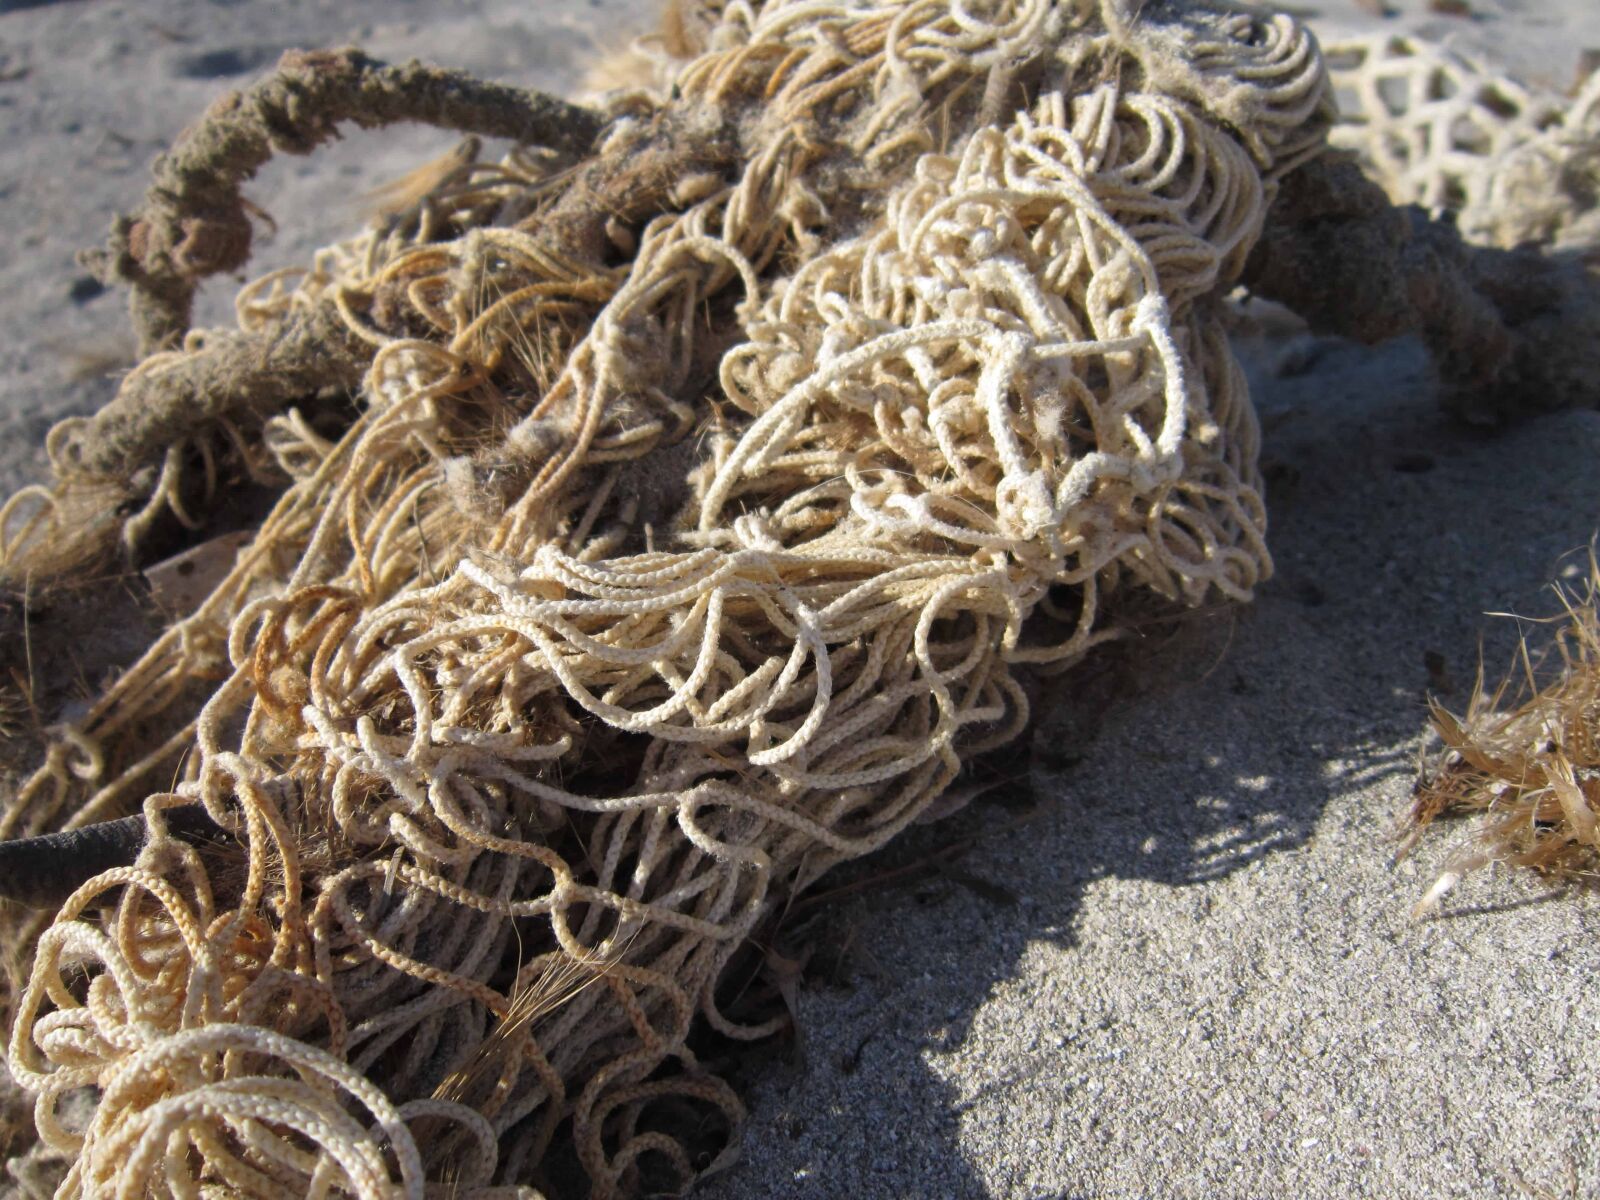 Canon PowerShot A3200 IS sample photo. Rope, ground, daylight, outdoor photography